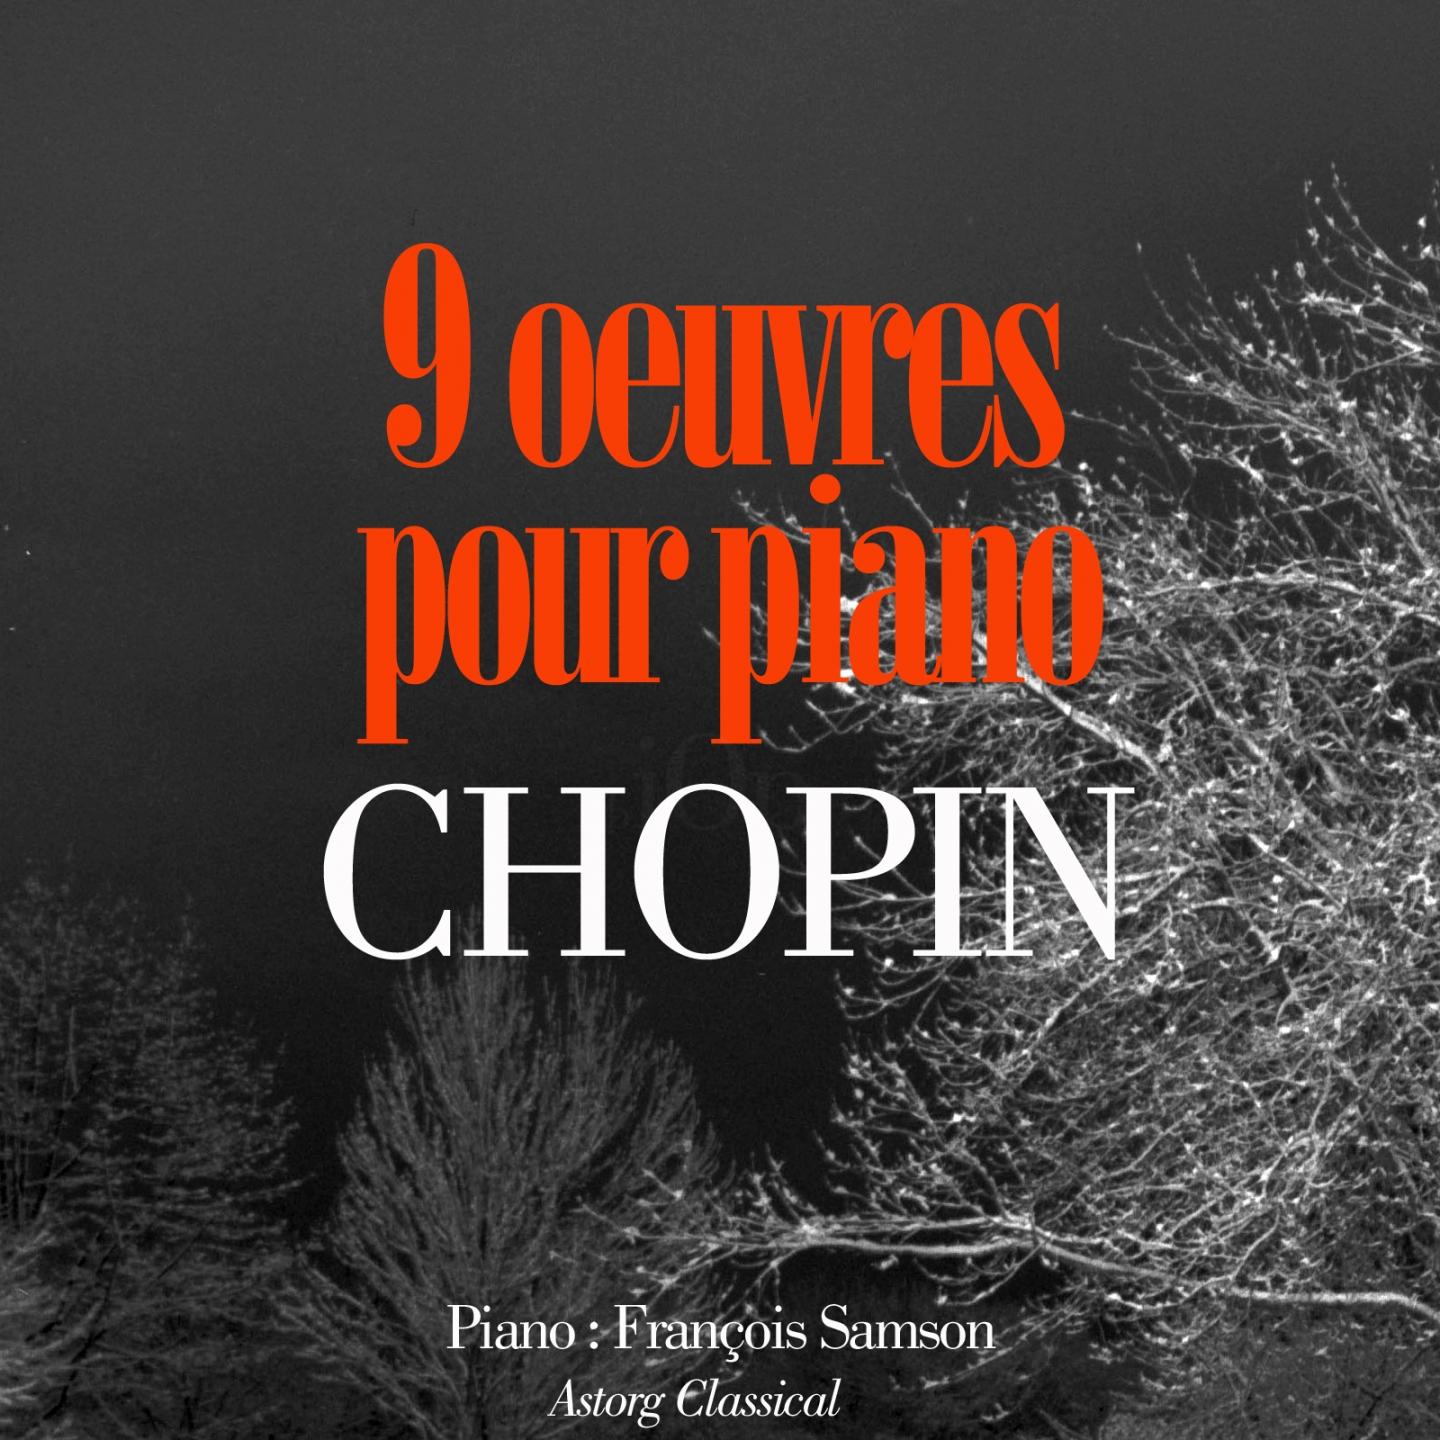 Chopin : 9 uvres pour pianos